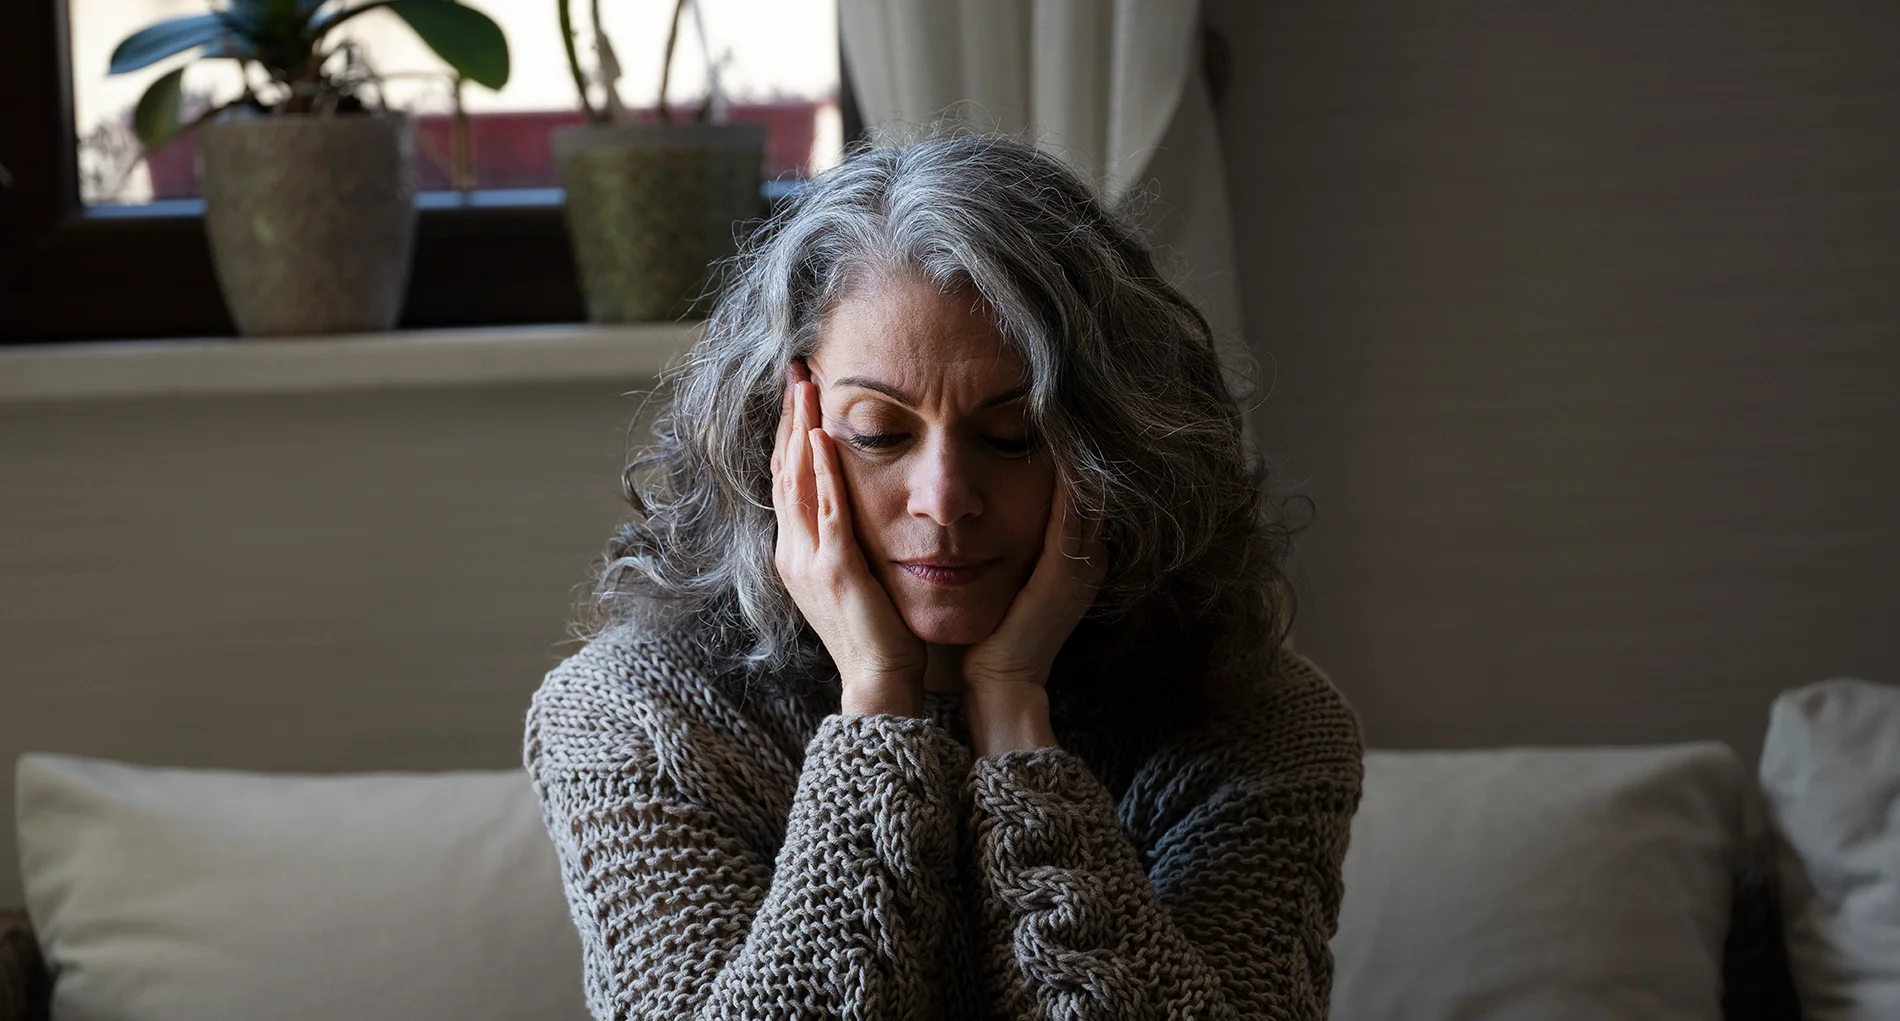 This image is utilized in the 'Premenopause vs Perimenopause: Symptoms, Treatment, and More' post on PatchMD - Vitamin Patches and Supplements. It includes the post's title, 'Premenopause vs Perimenopause: Symptoms, Treatment, and More,' along with 'Premenopause vs. Perimenopause' as part of the graphic.